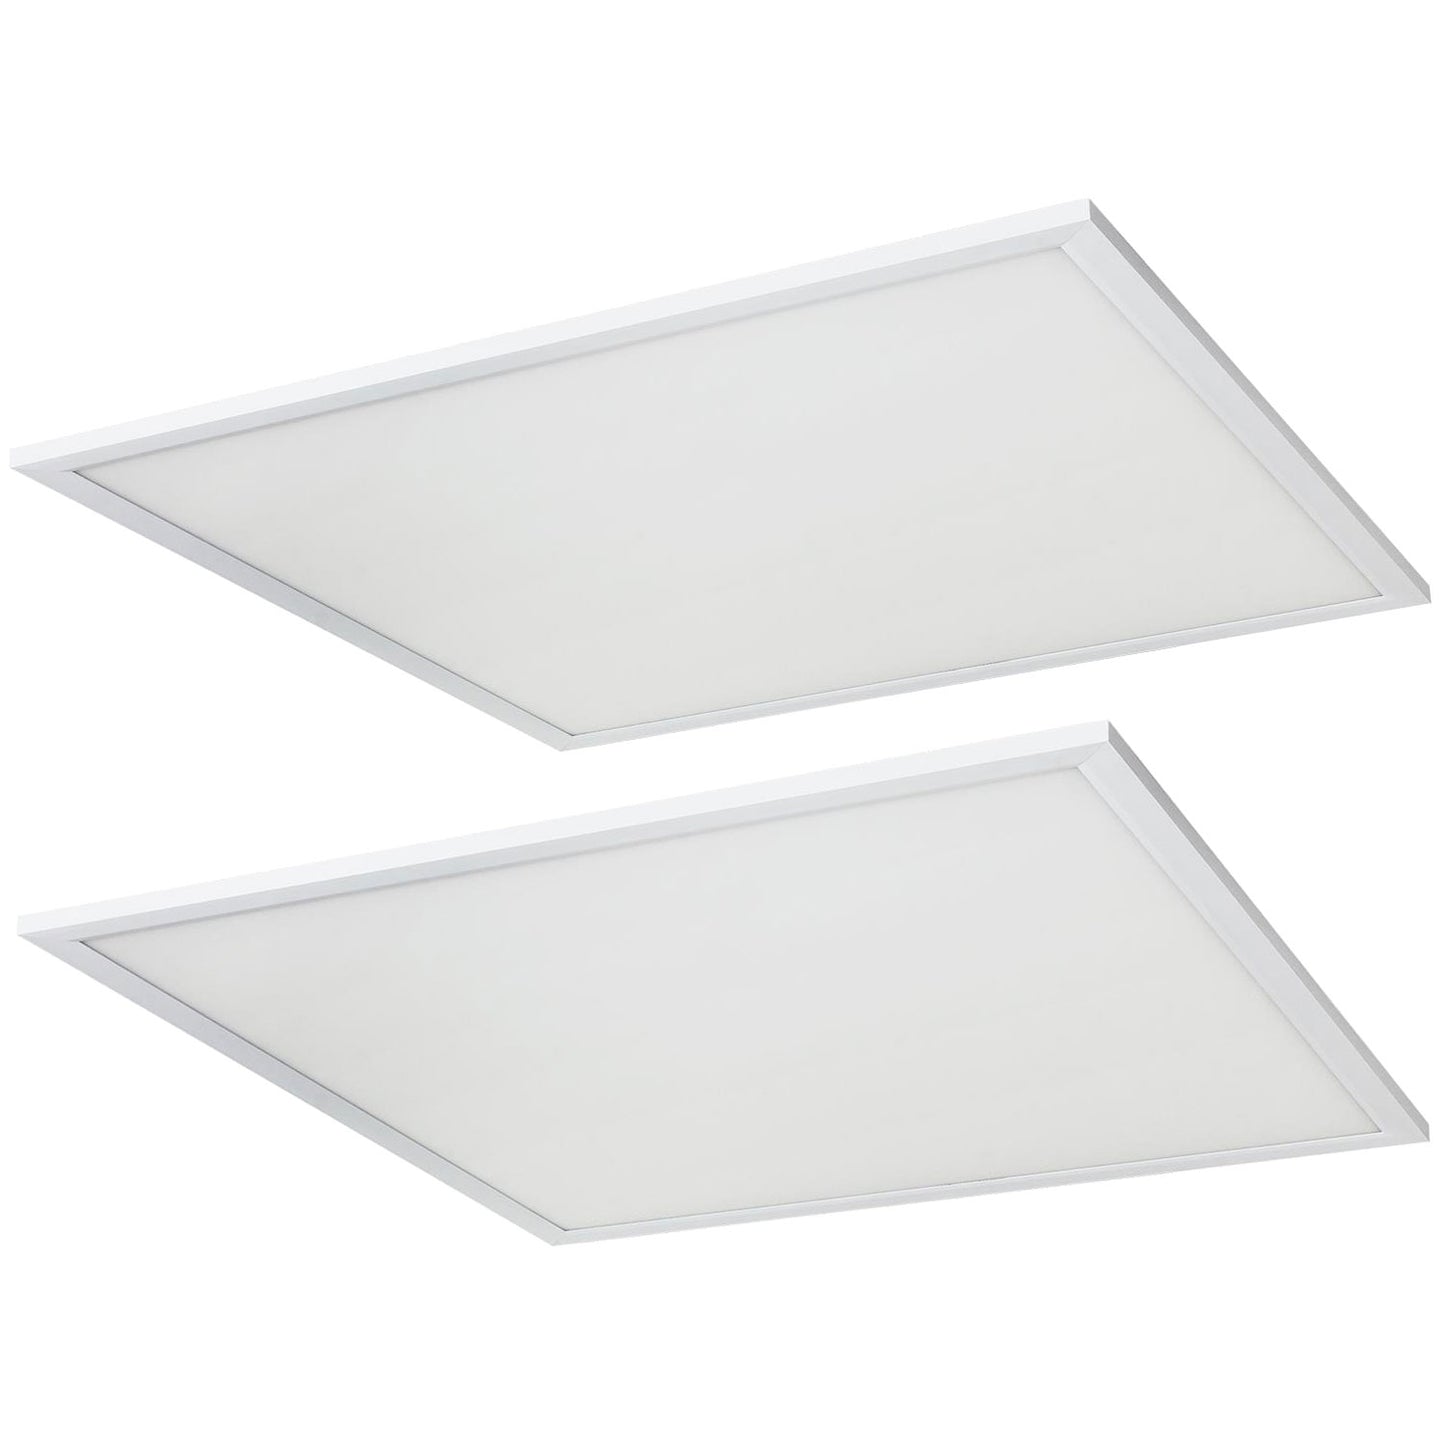 2-Pack Sunlite 2x2 Foot LED Lay-in Light Panel Fixtures, Color Tunable (35K/40K/50K), Power Tunable (20W/30W/40W), 120/277 Volt, Dimmable, White Finish, 50,000 Hour Life Span, ETL & DLC Listed